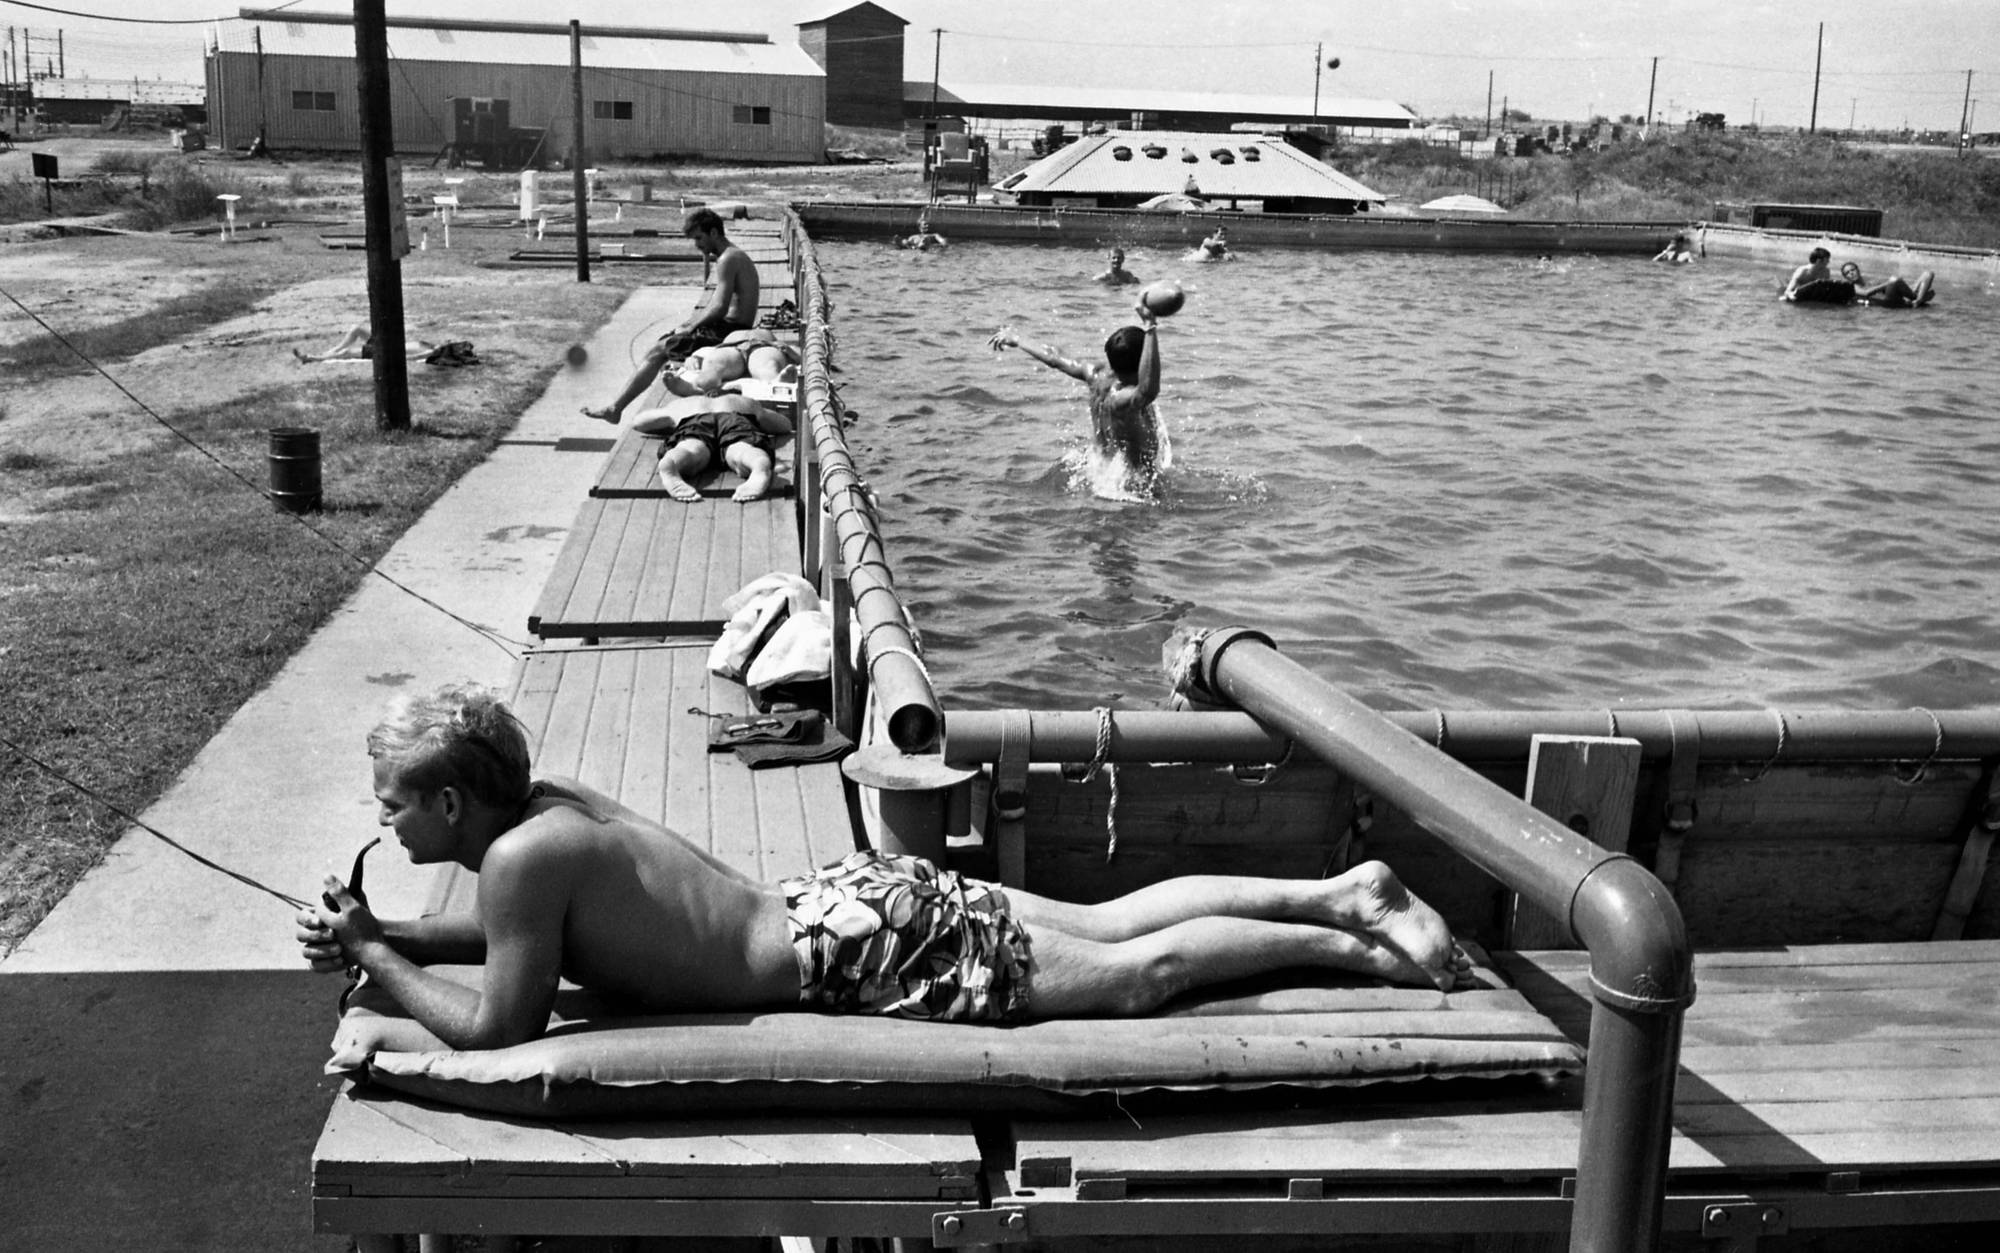 Soldiers sunbathing and swimming at a pool.